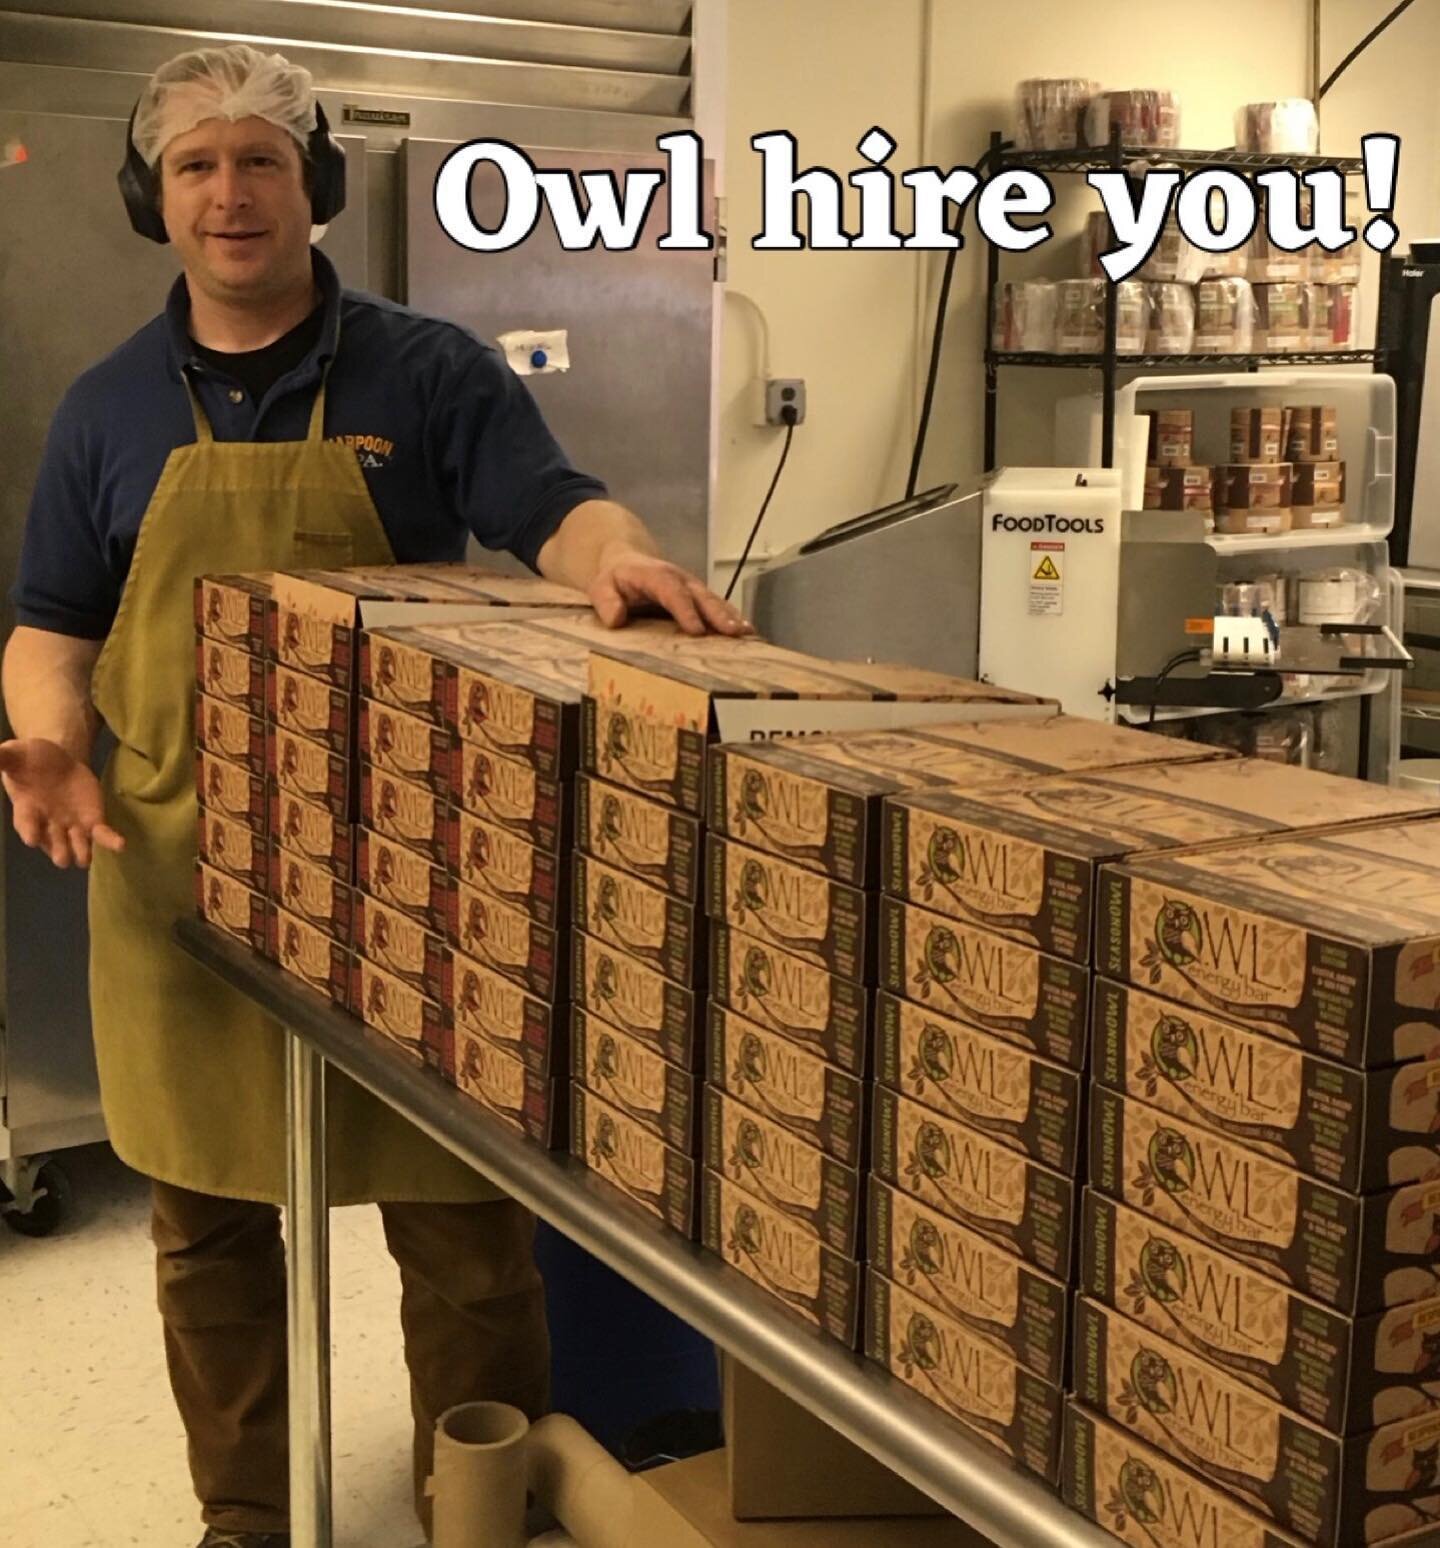 We&rsquo;re looking for one more baker&rsquo;s assistant at our facility in Brattleboro, VT.  Mon-Thur 10am-4pm.  Must be 18 or older.  Learn more here: Jobs &mdash; O.W.L. Energy Bar (owlenergybar.com) and fill out an application online: 
https://do